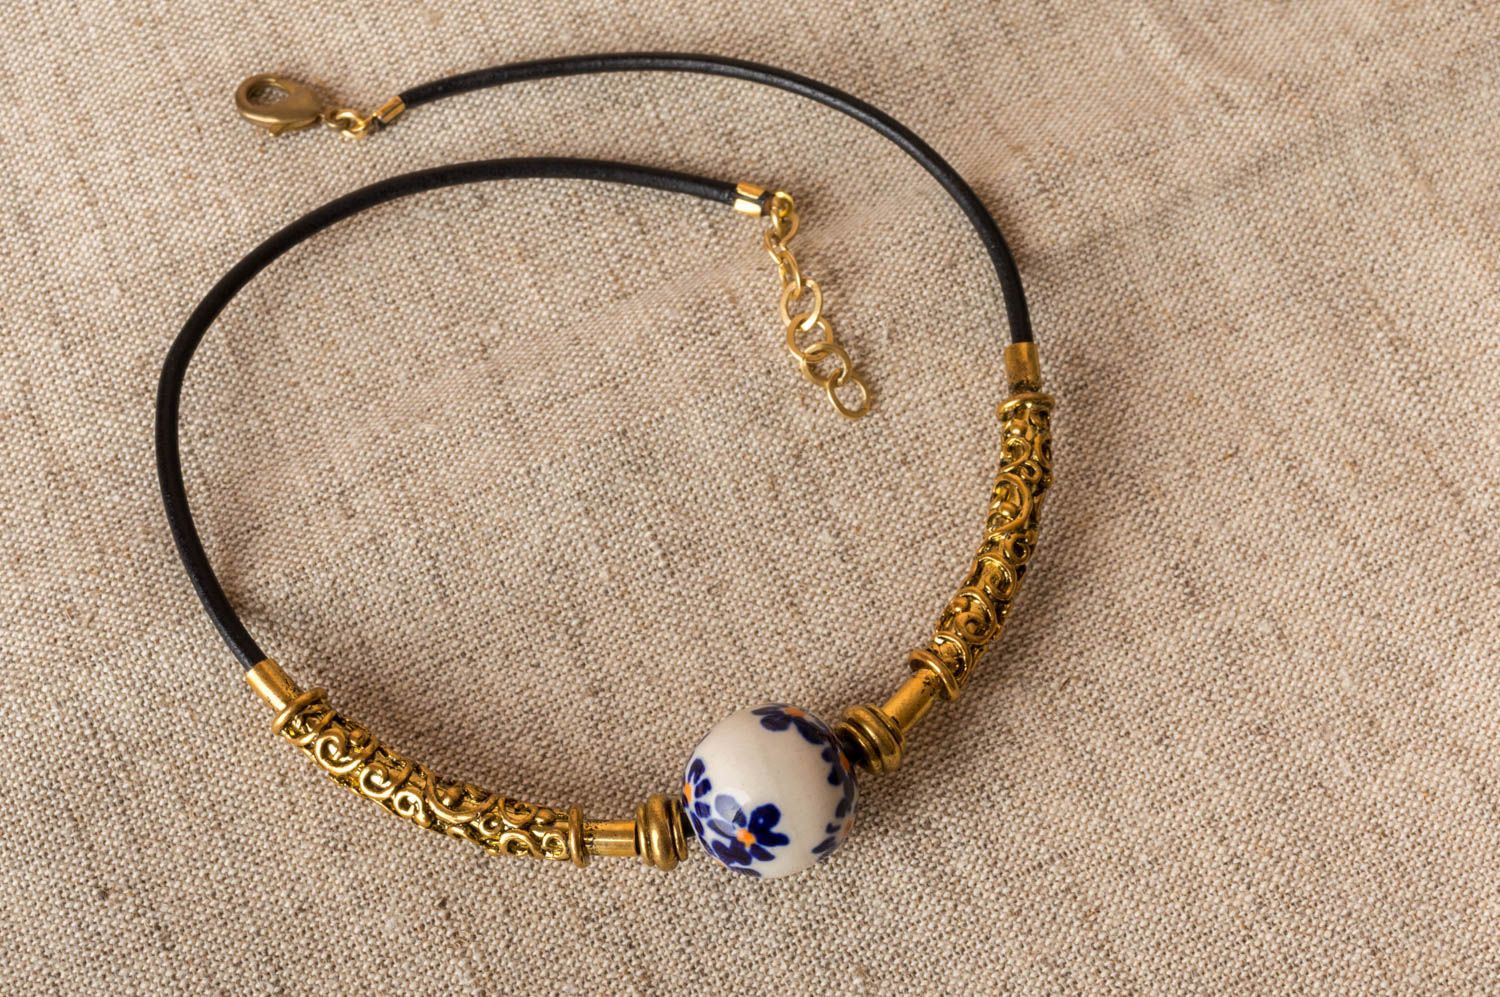 Handmade necklace choker made of brass with porcelain bead on leather lace photo 1